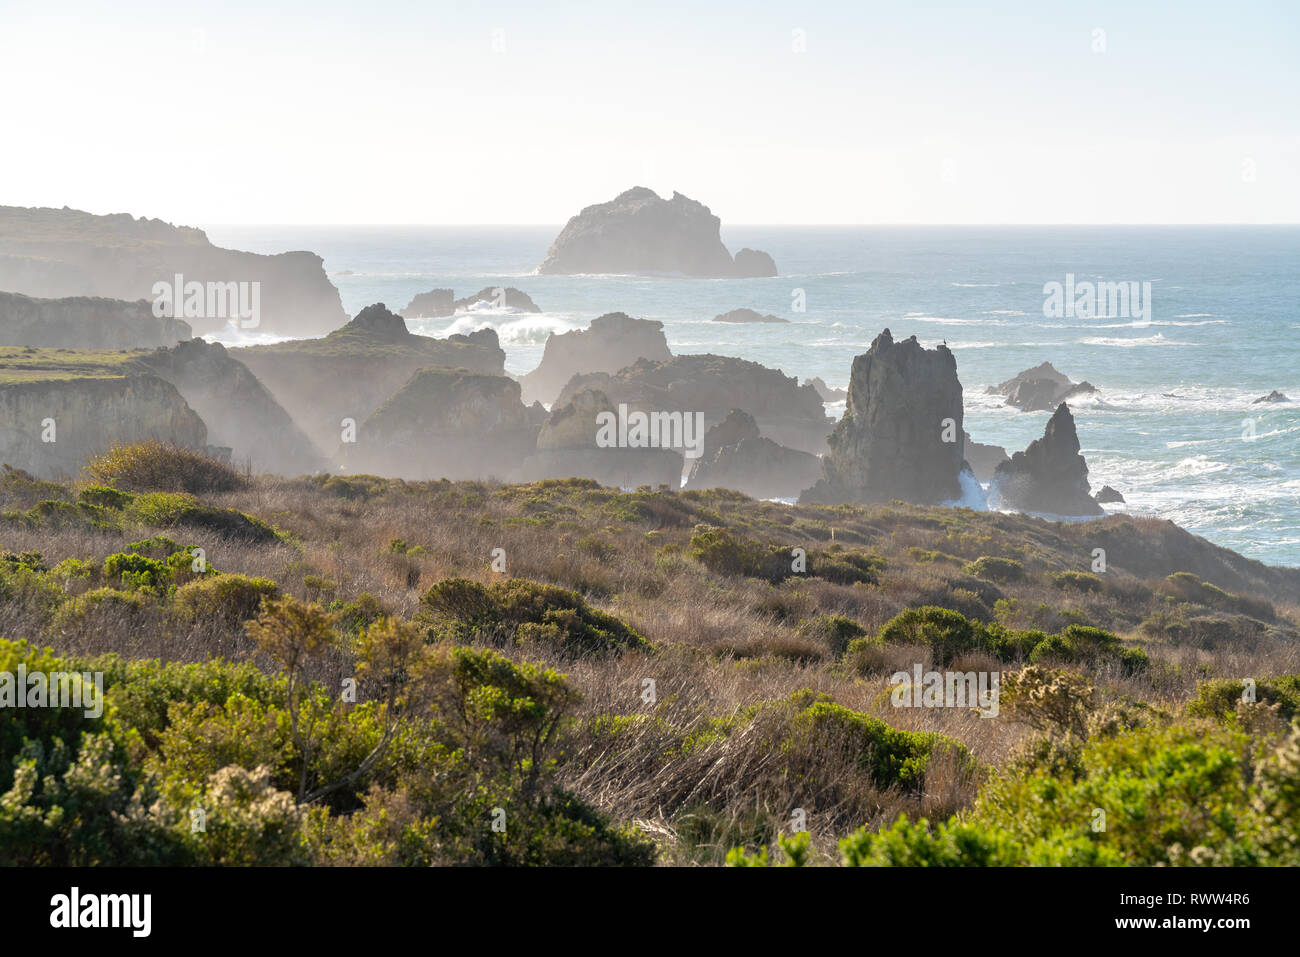 Big Sur, California - Many layers of sea stacks and rugged coastline along the west coast of the United States and the famous Highway One. Stock Photo